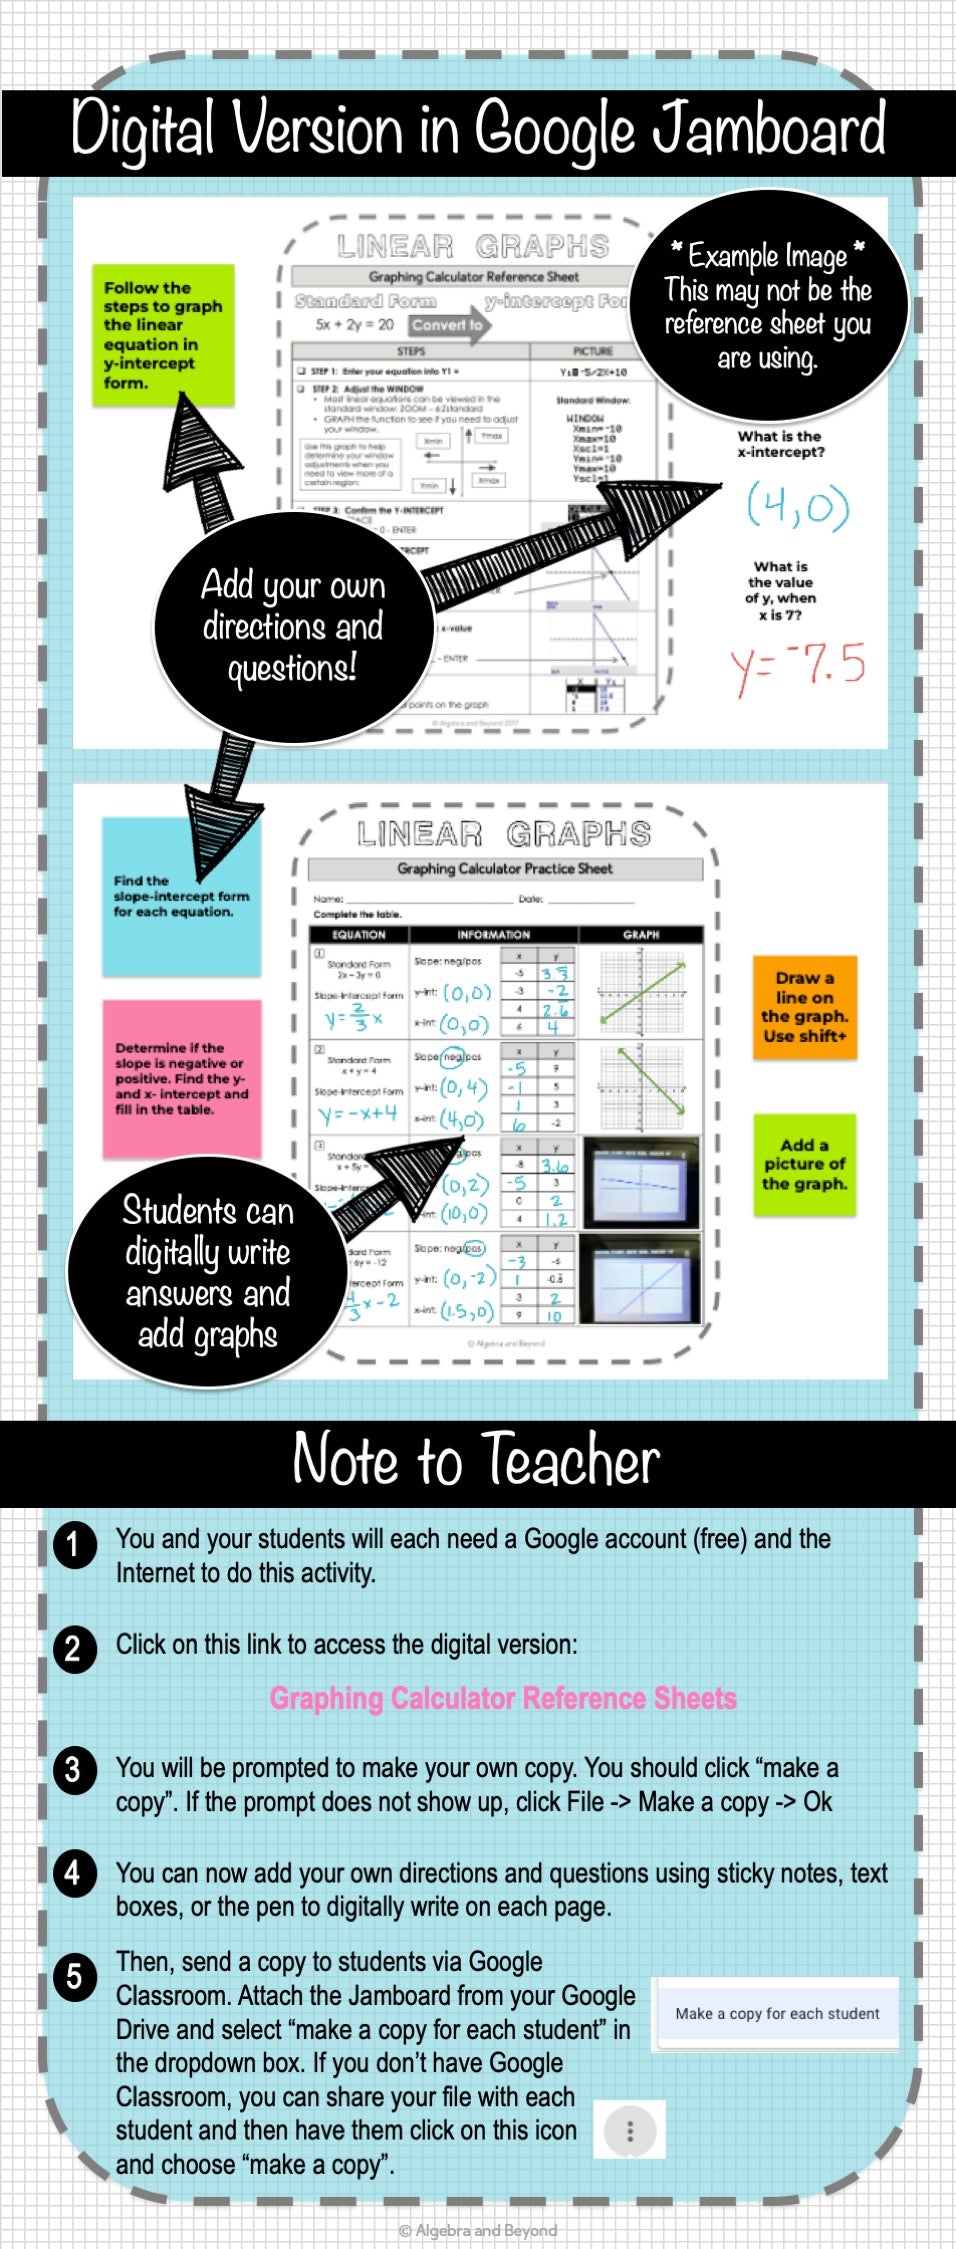 Graphing Linear Functions | TI-84 Calculator Reference Sheet and Practice